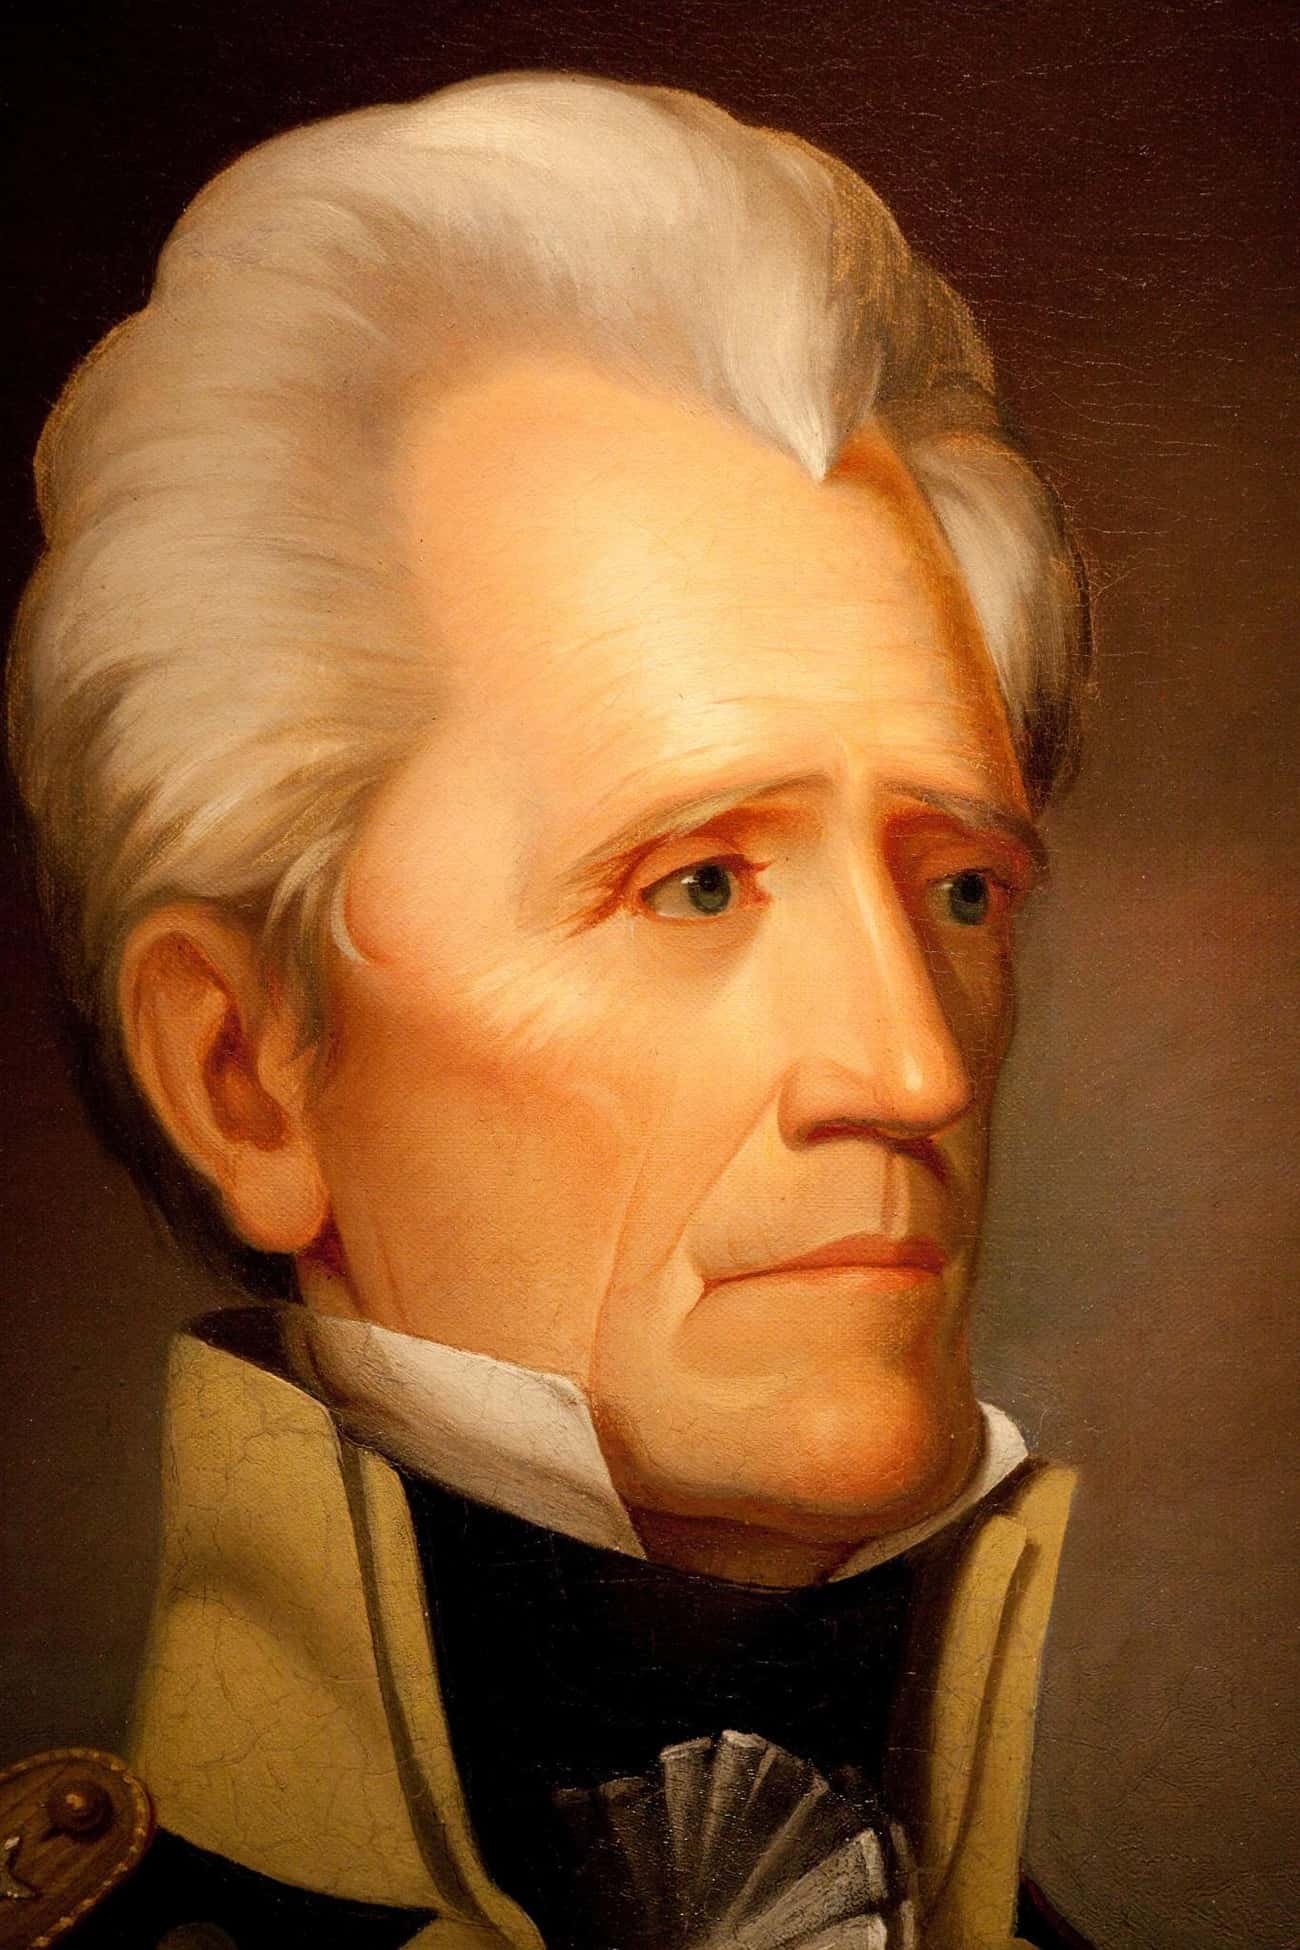 Andrew Jackson Shamed Two Sex Workers At A Party